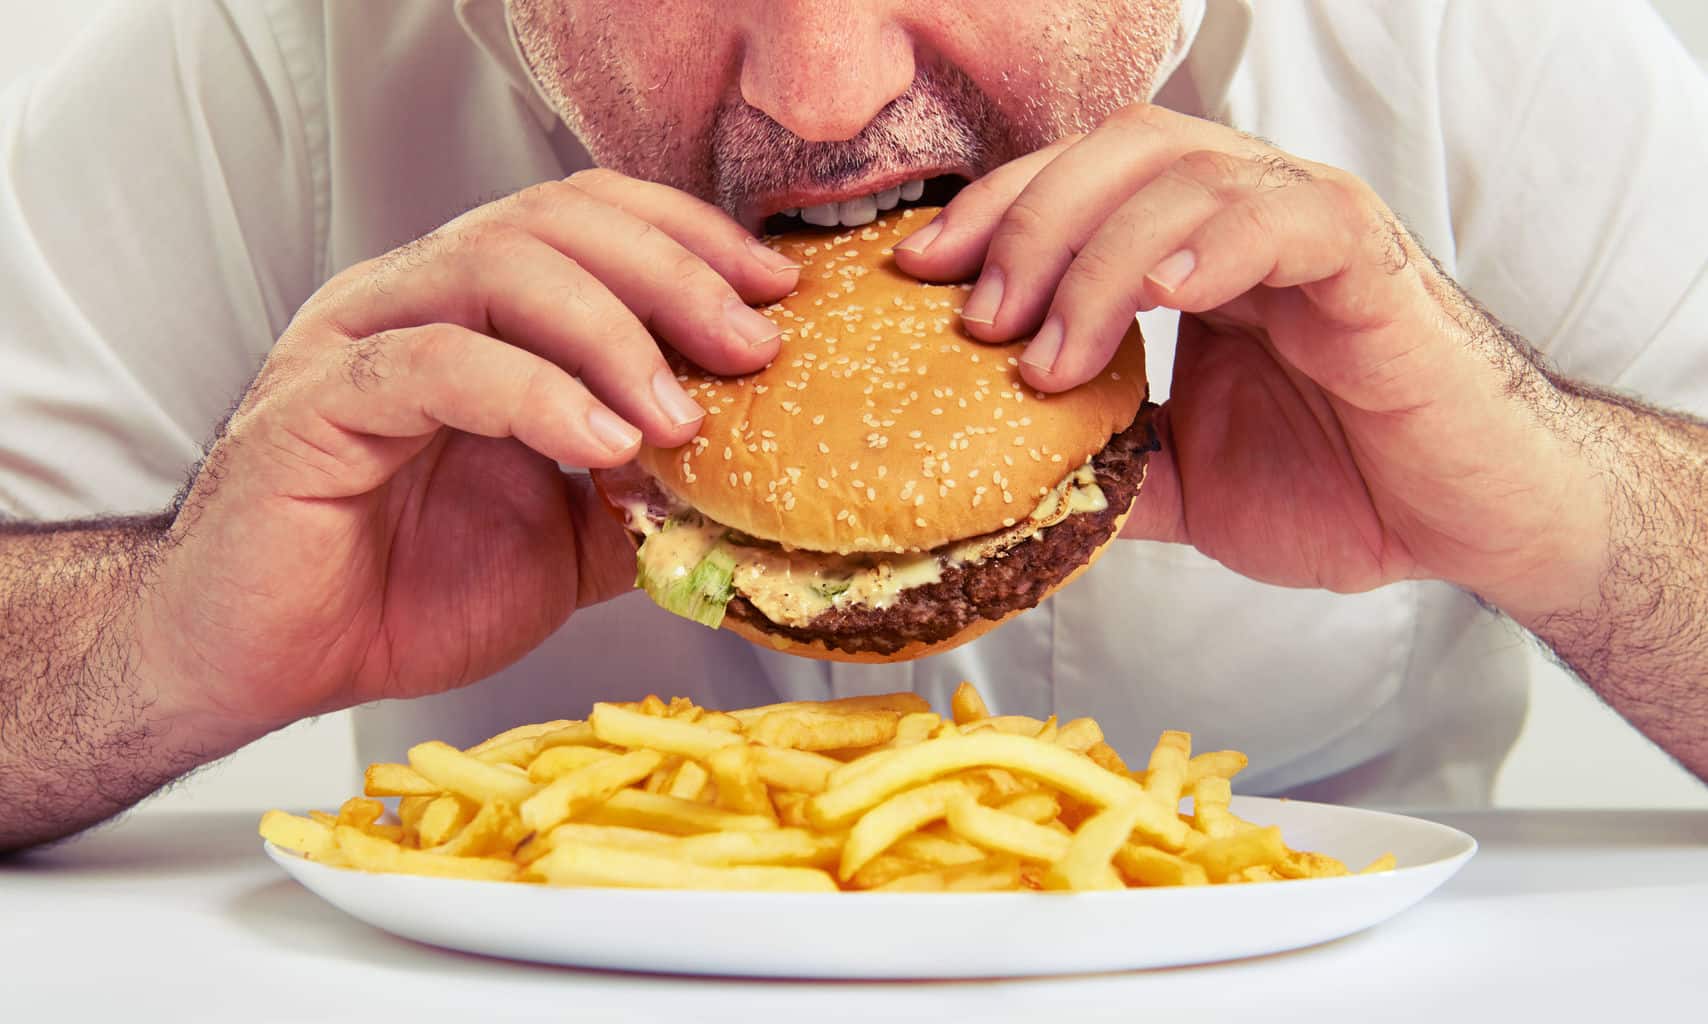 Does eating too much fat cause ED?